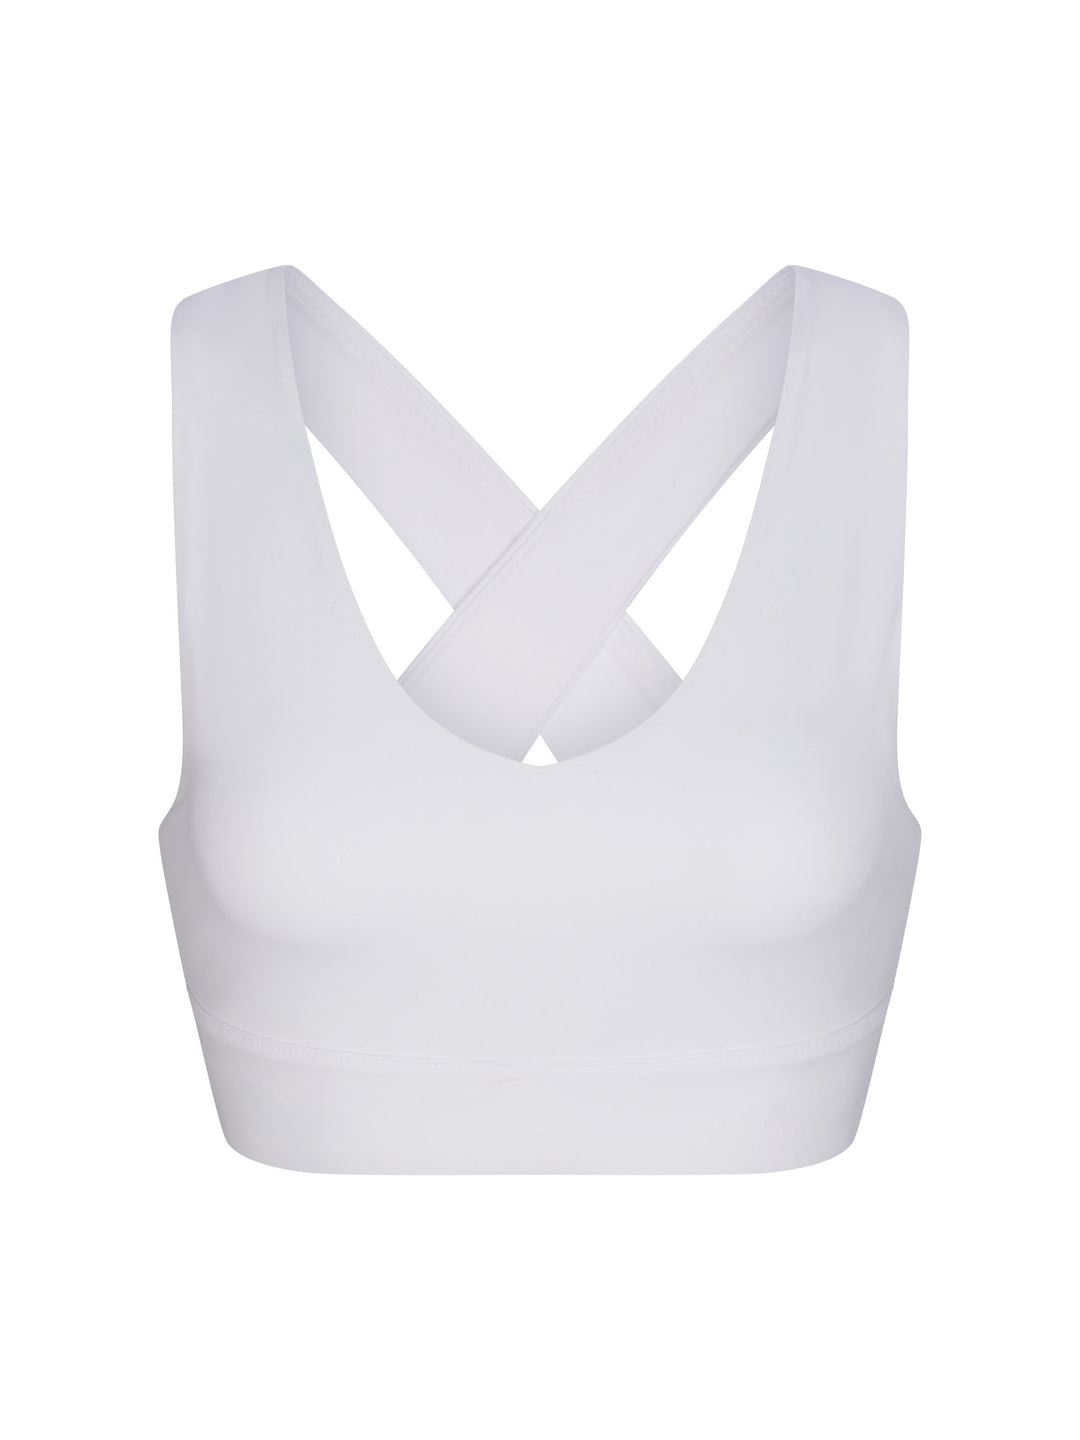 X-Over Back Sports Bra front view in white.